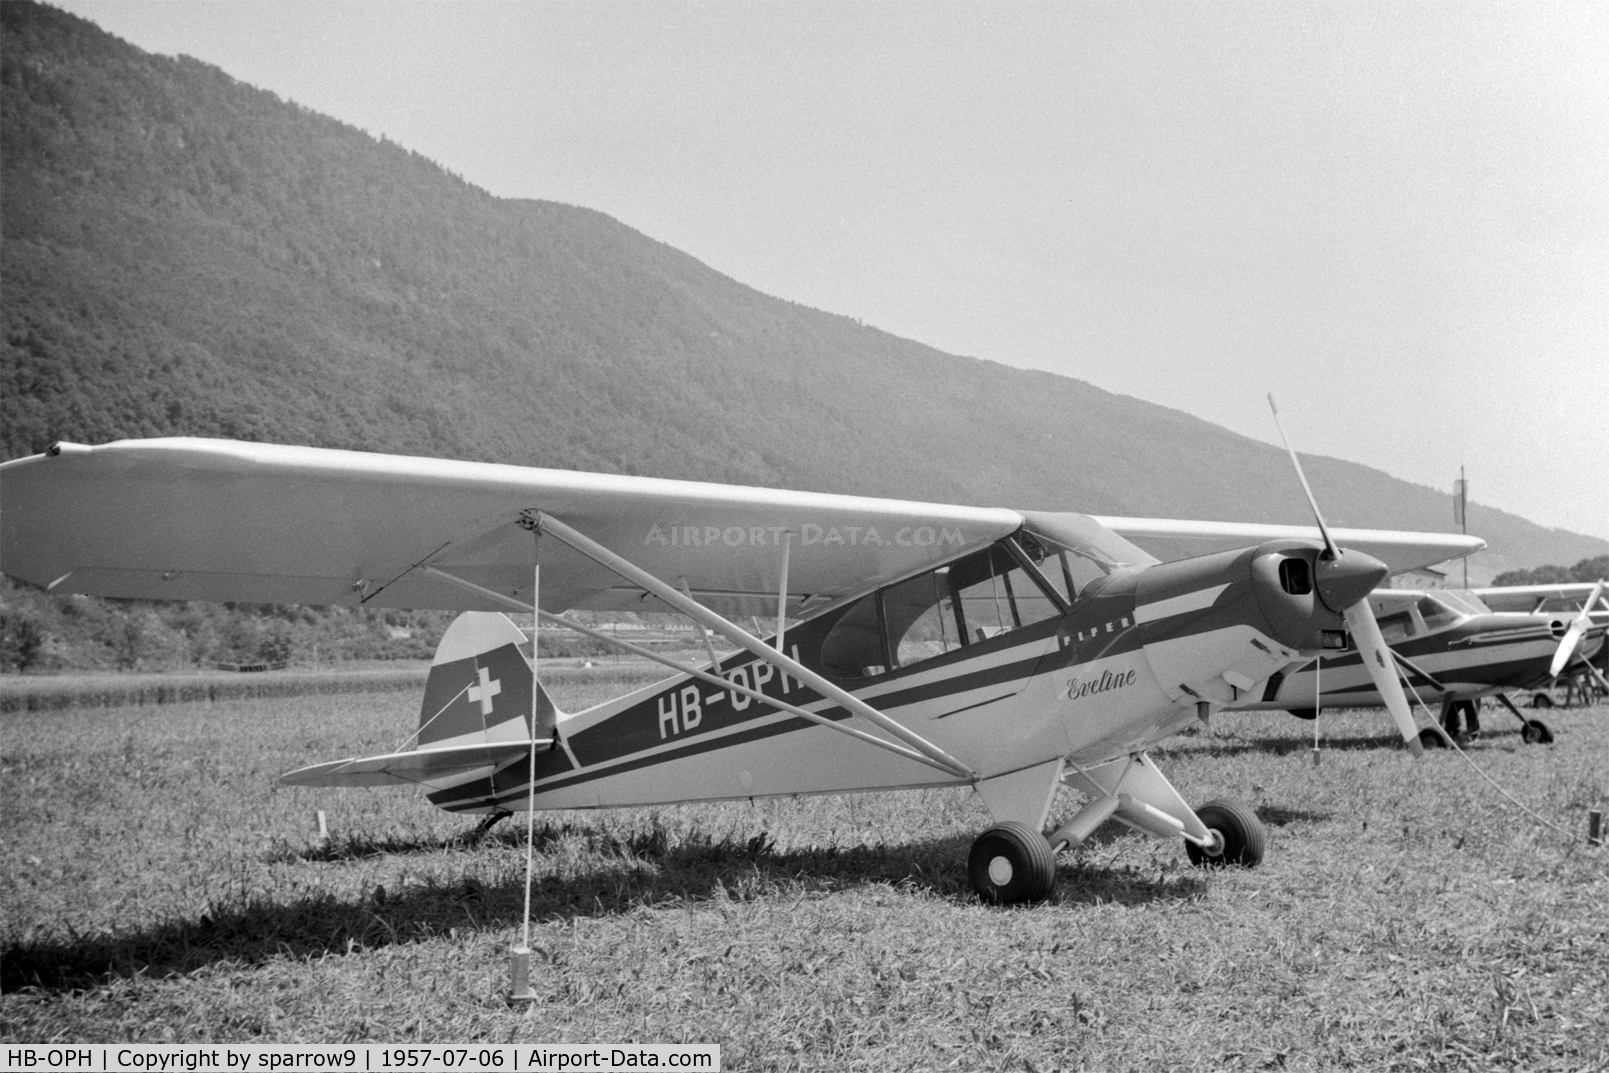 HB-OPH, 1957 Piper PA-18-150 Super Cub C/N 18-5517, A newly registered aircraft shown at Biel-boezingen airfield (closed) during the Rally de la Montre. HB-registered since 1957-04-24. Scanned from a 6x9 b/w negative.